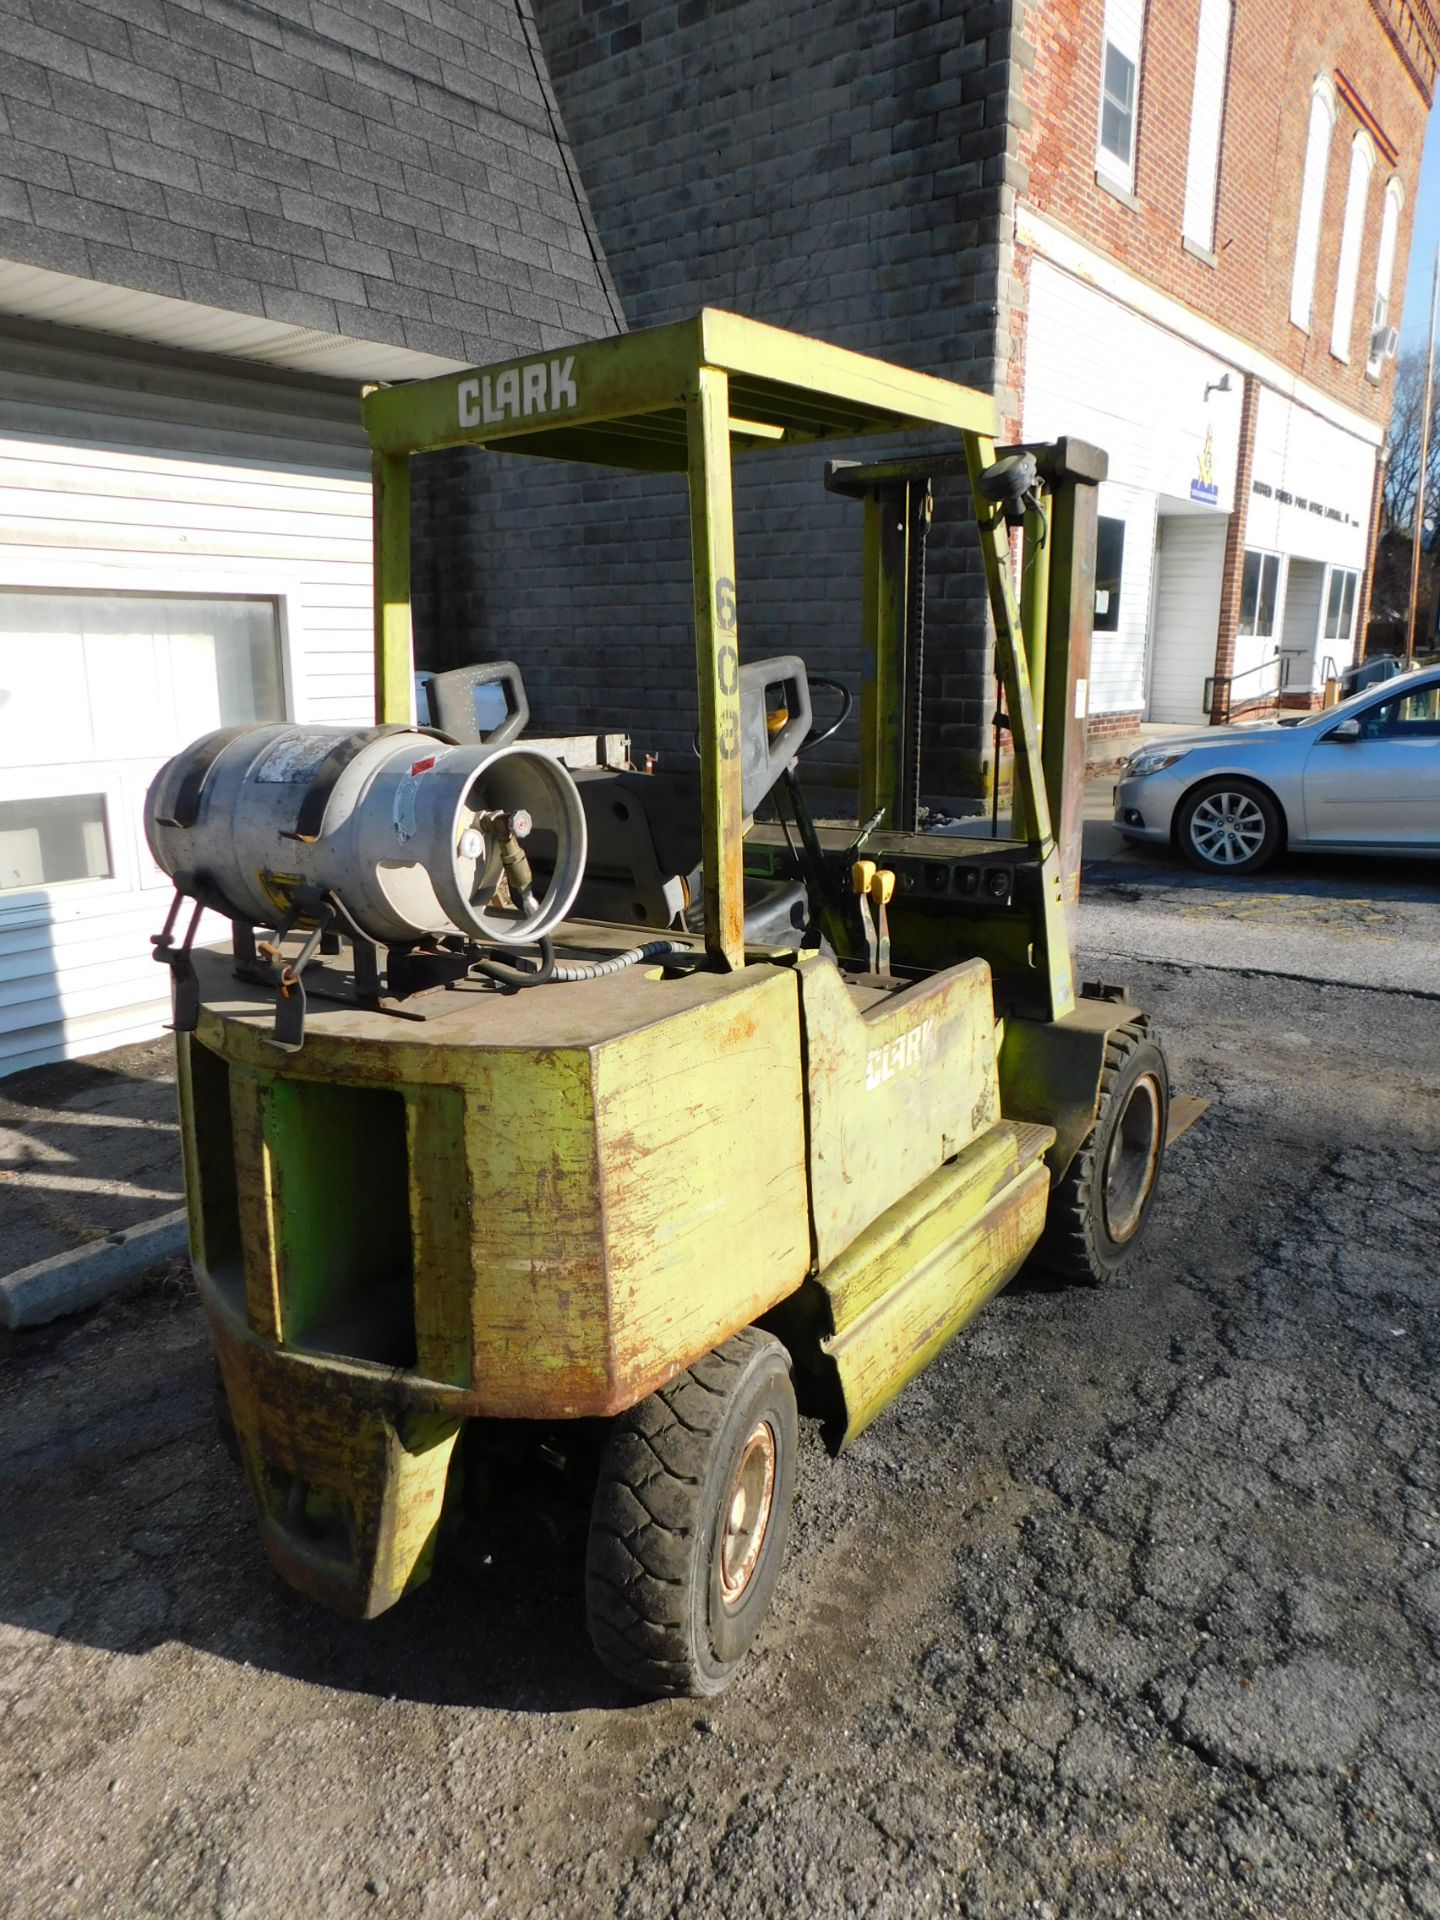 Clark Model GPX30E Fork Lift, s/n Unknown, 4,500 Lb. Capacity, LP, Hard Tire, Cage - Image 3 of 10